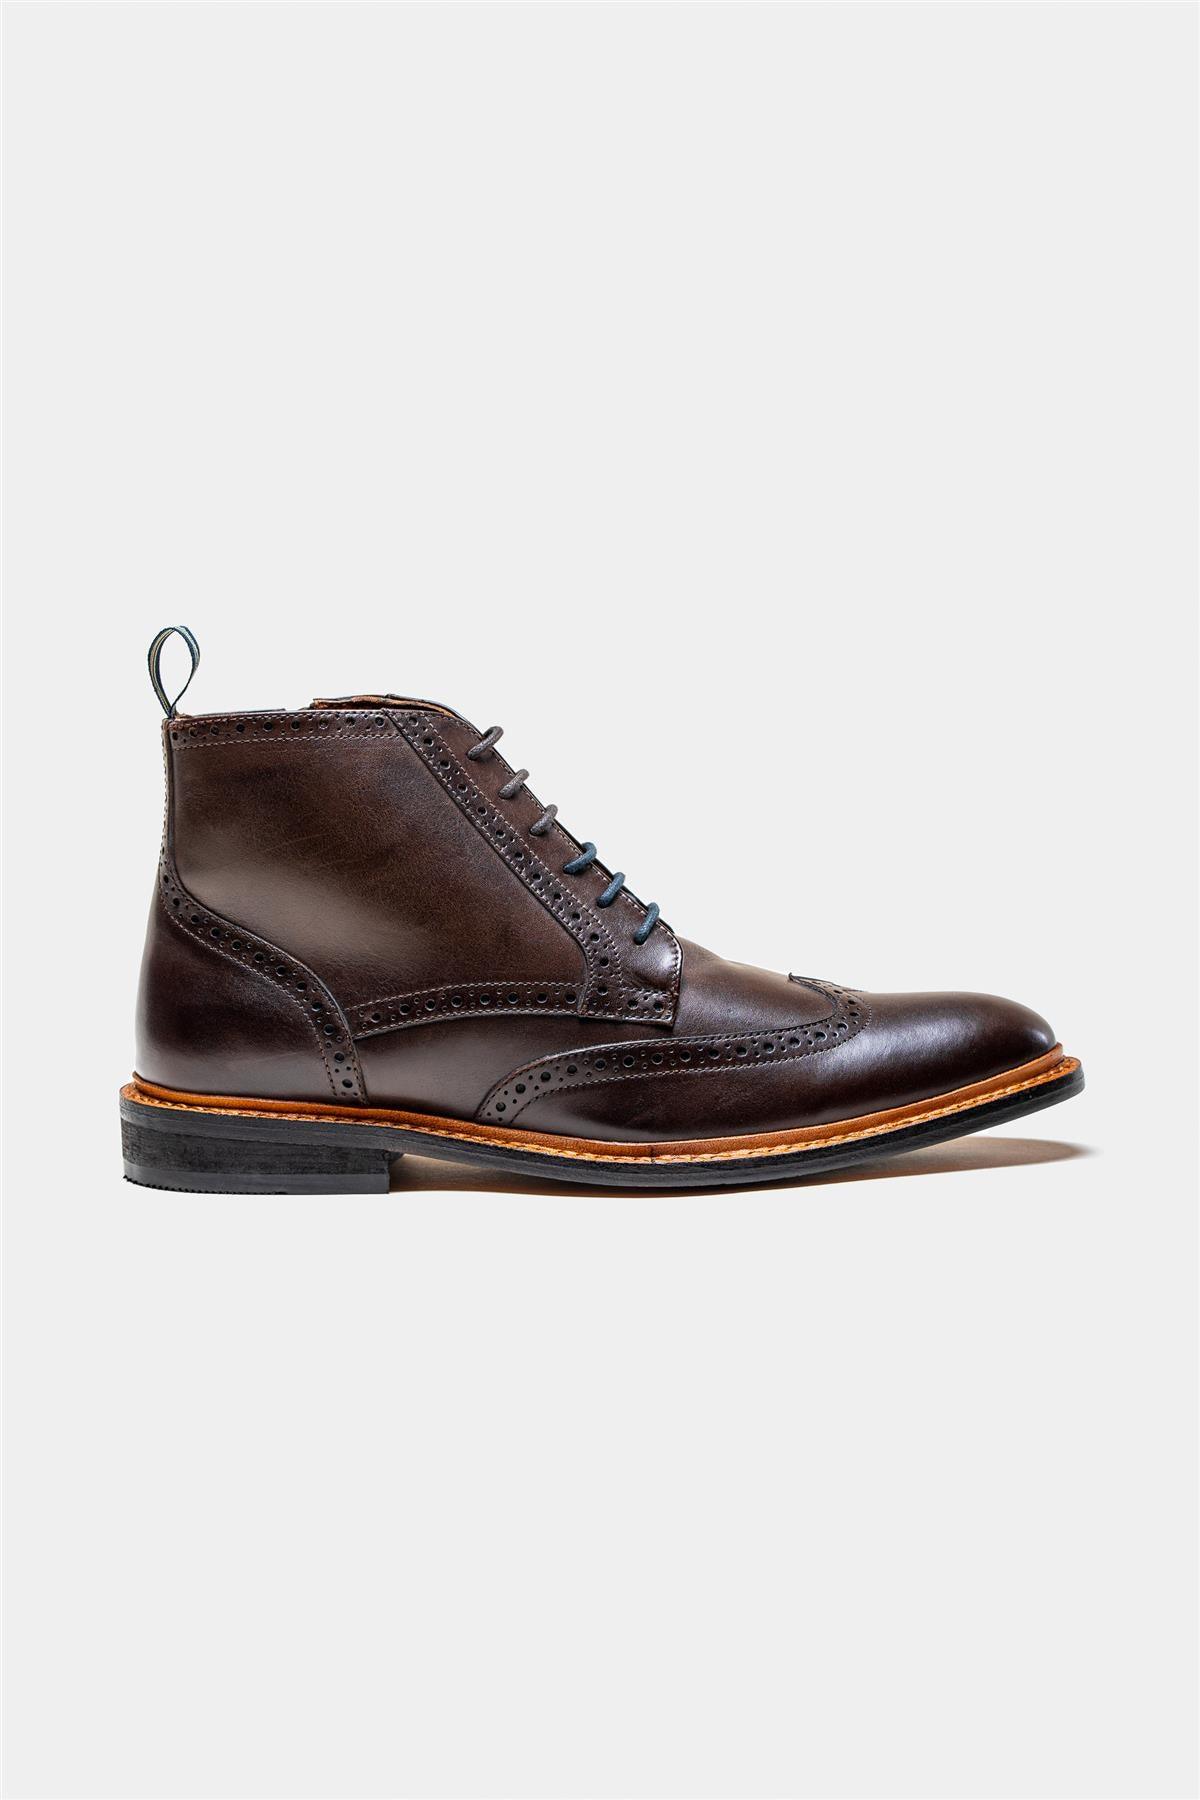 Ashmoor brown boots side